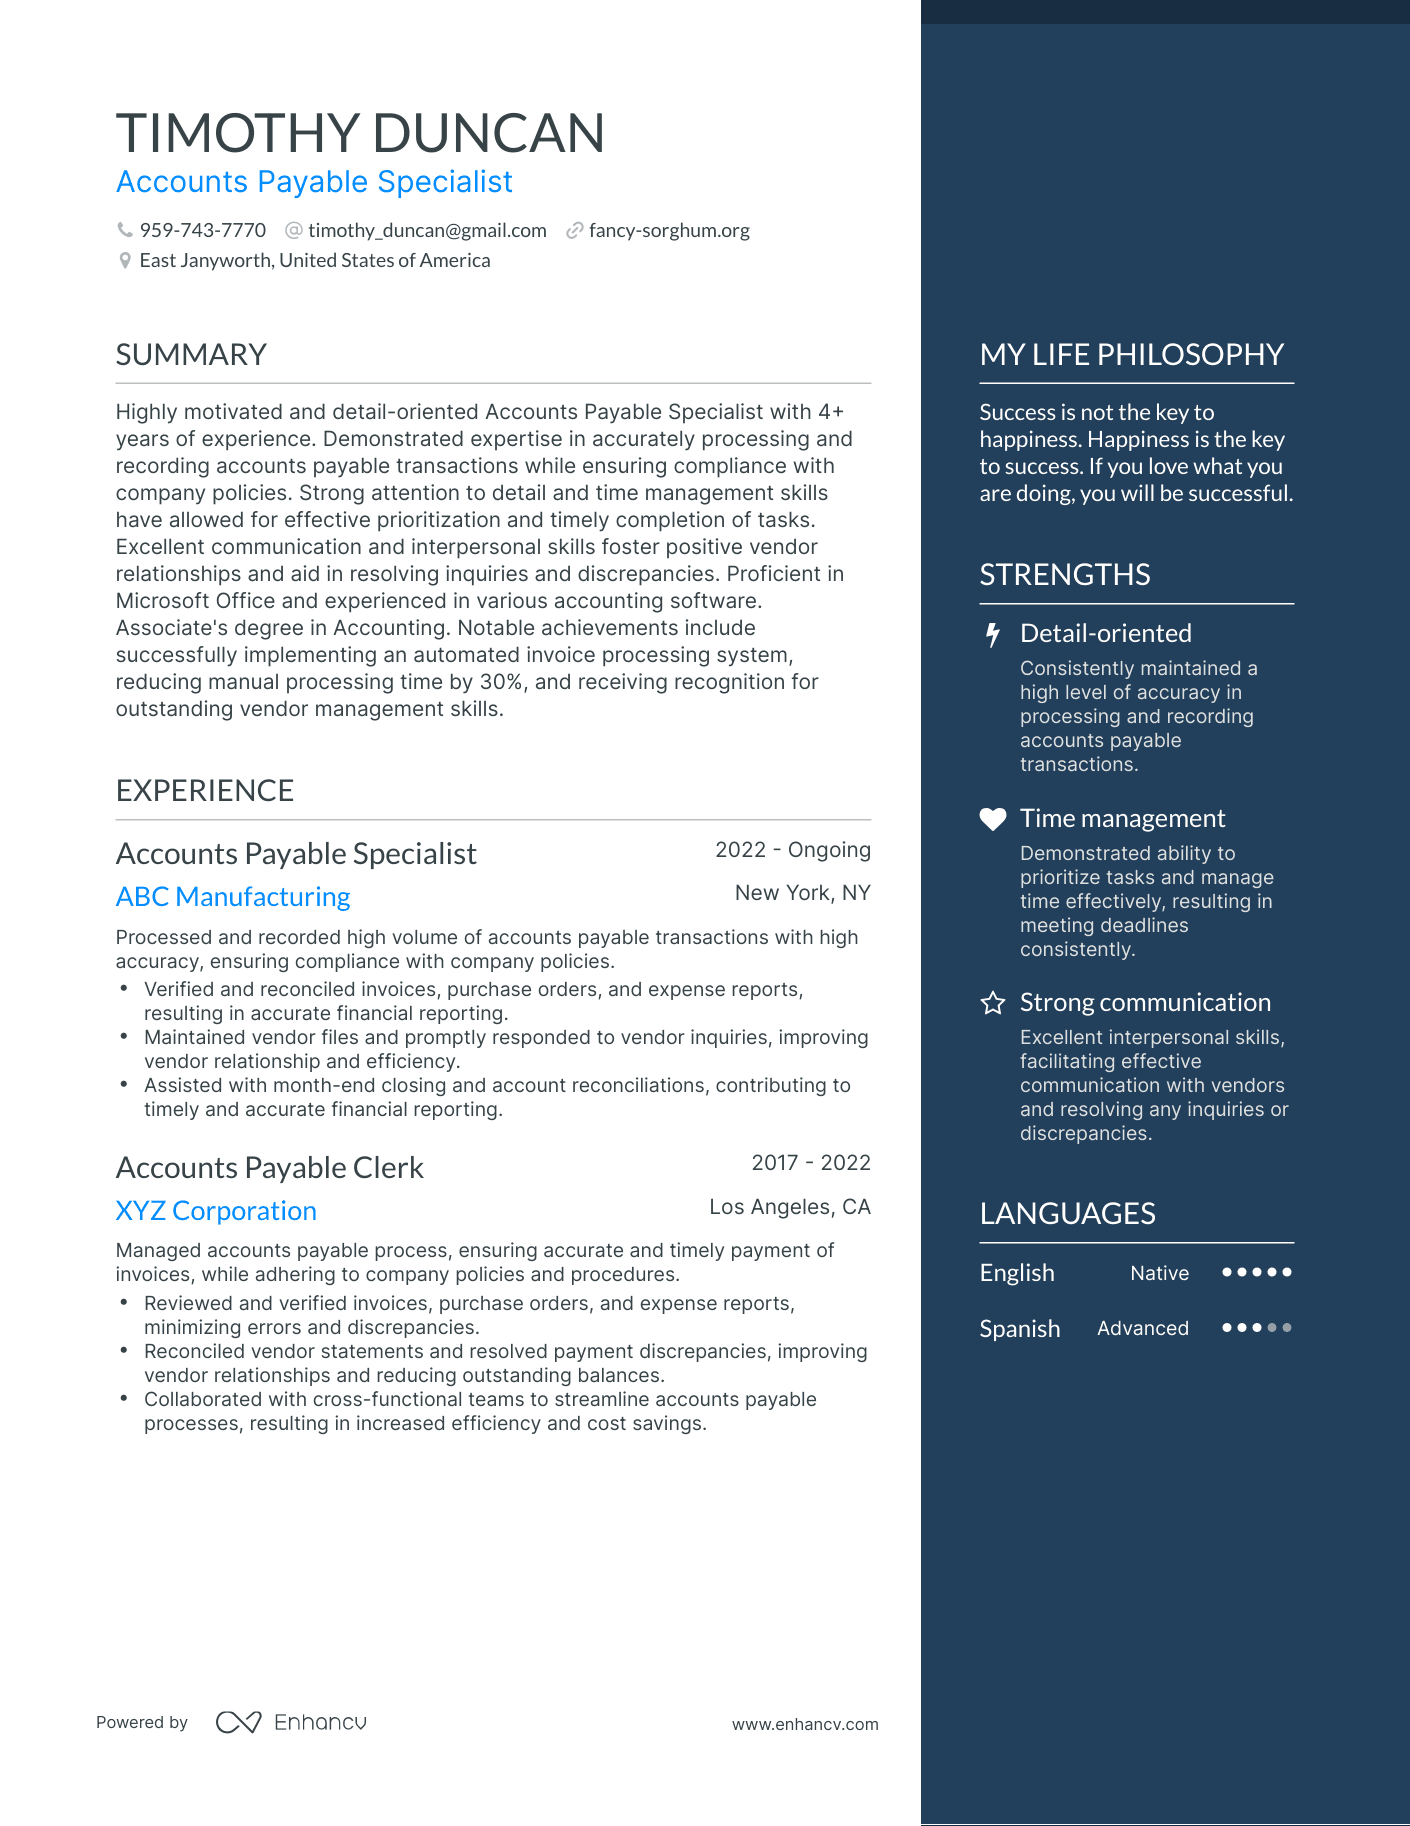 Accounts Payable Specialist resume example